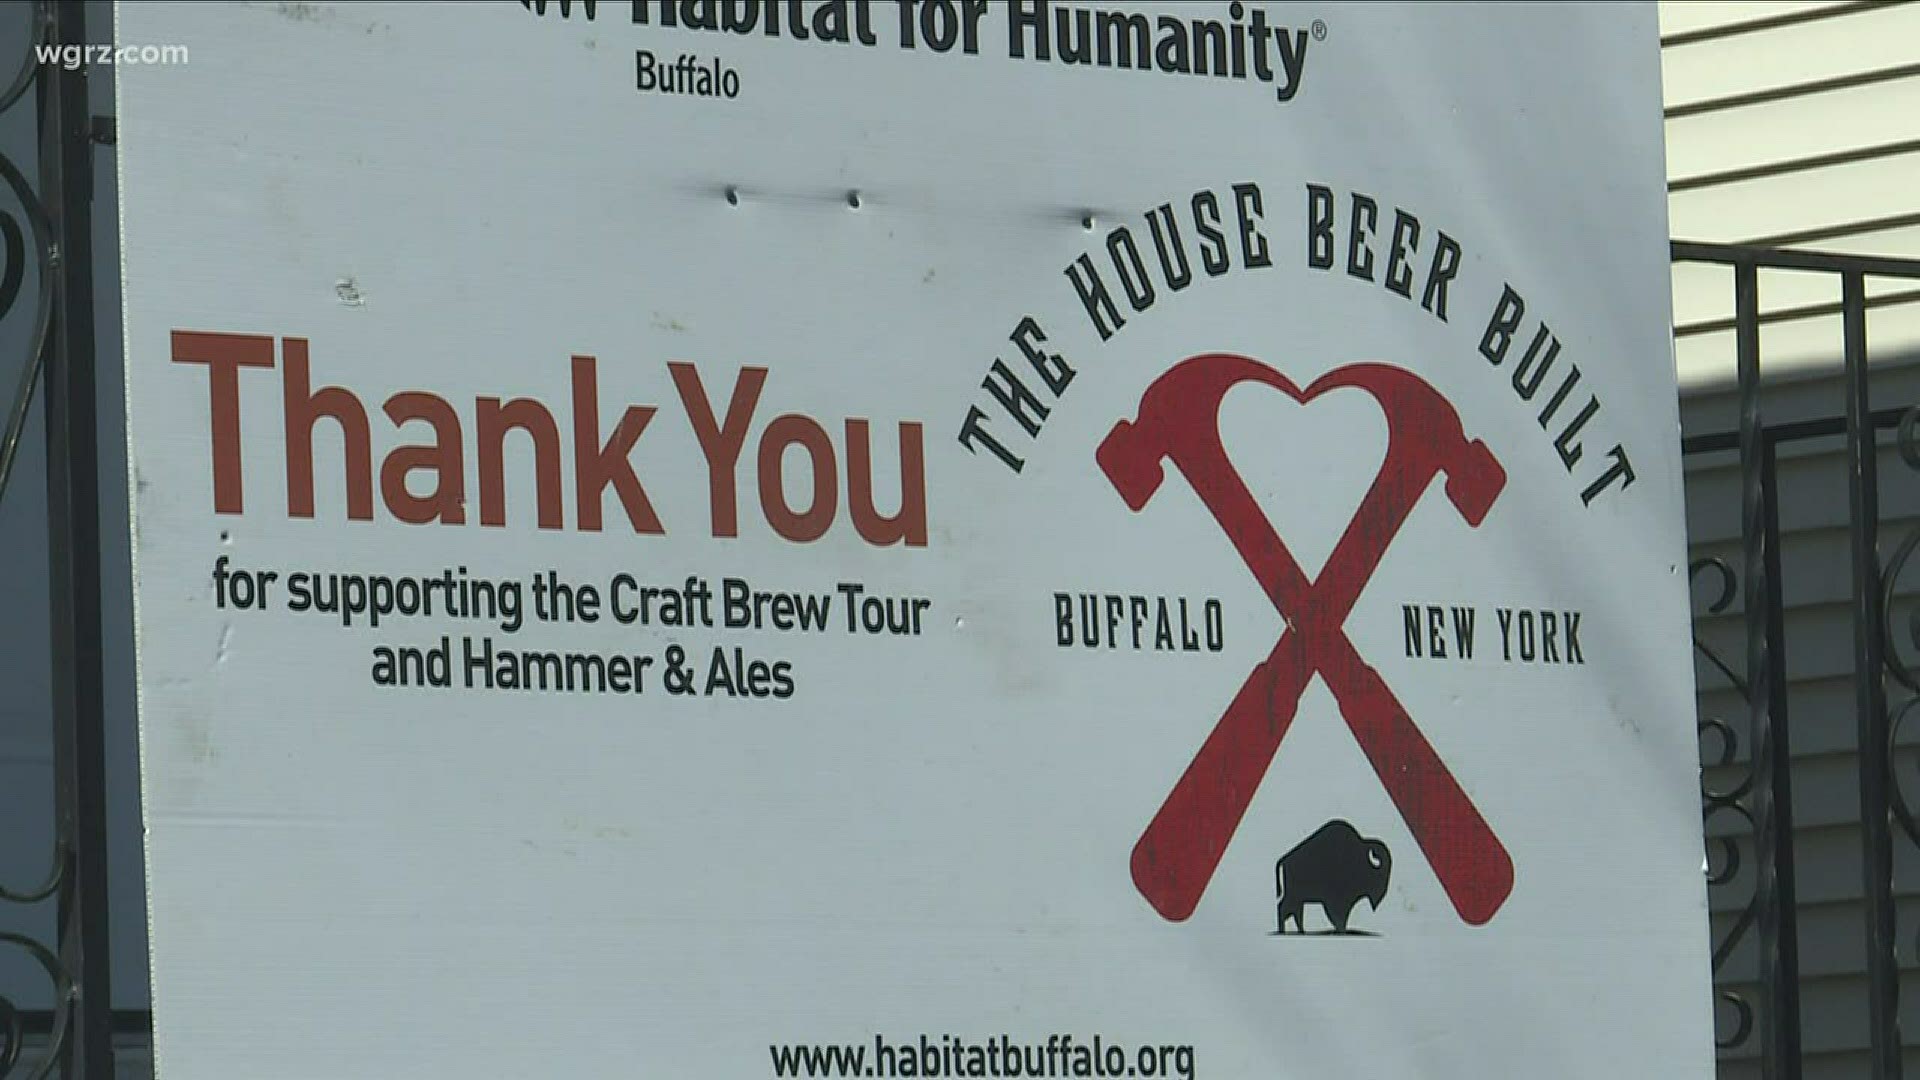 The campaign is called the "House Beer Built" and it usually ends with a big beer tasting event. 
But like everything else this years event was canceled.